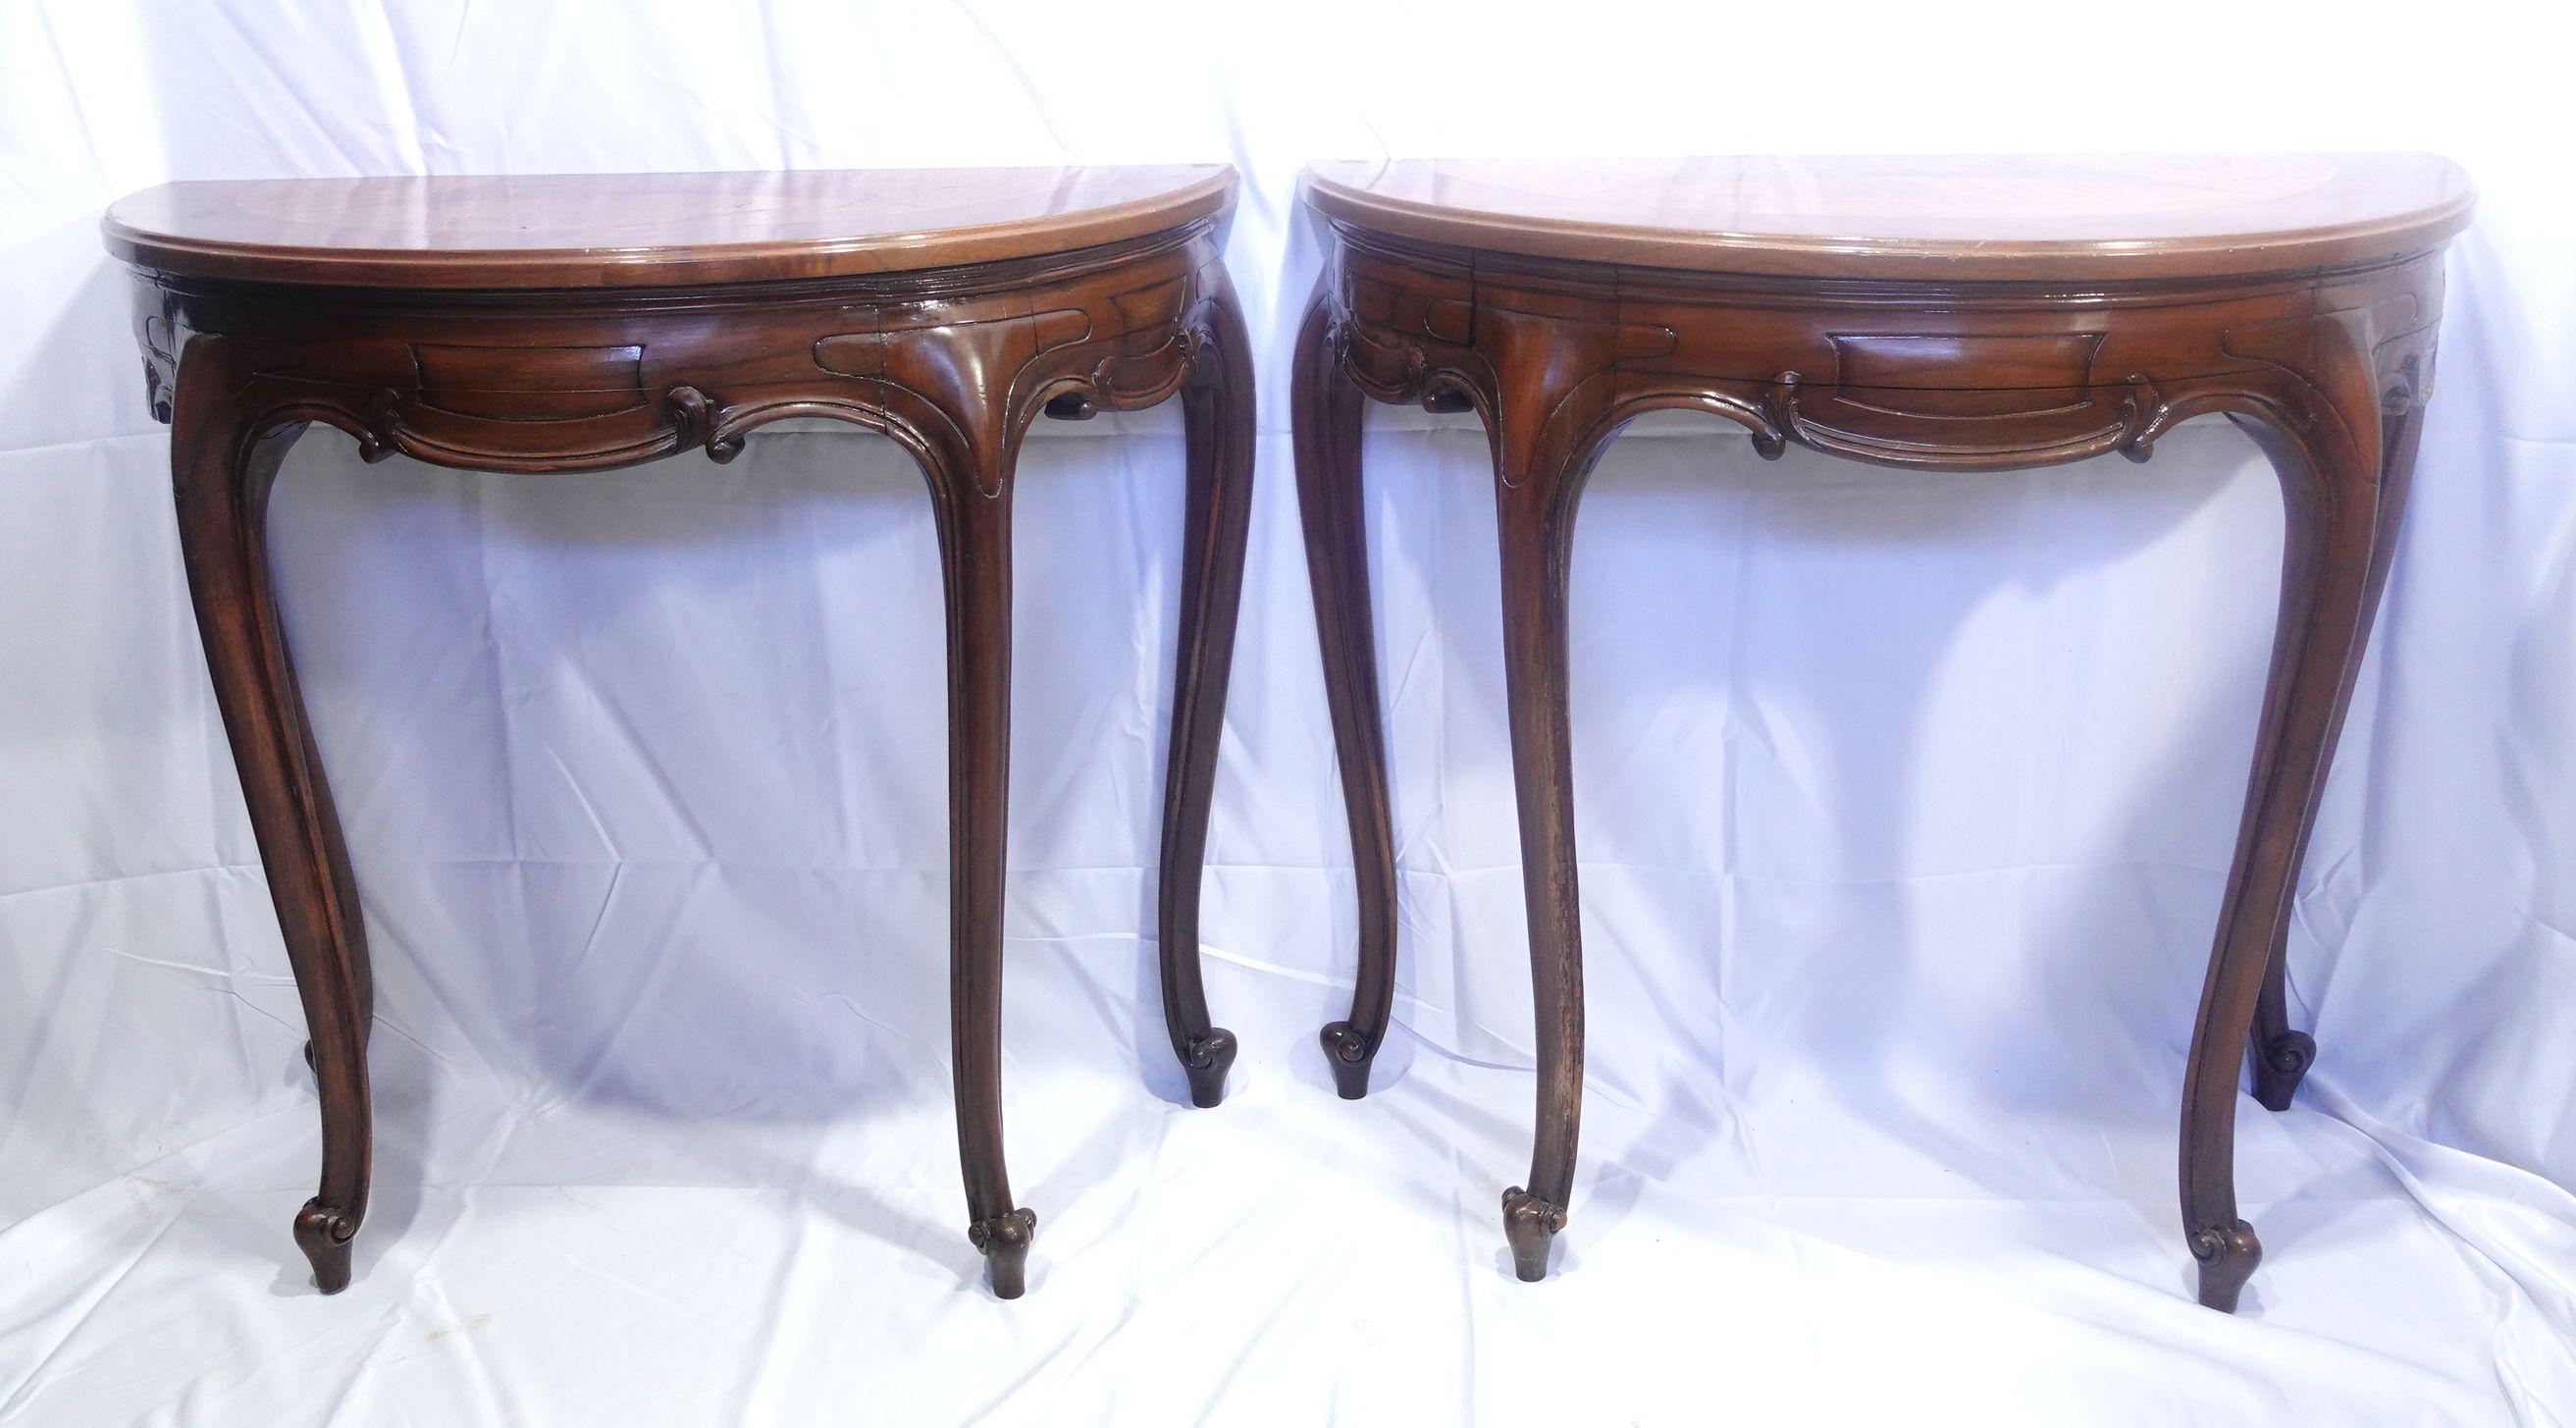 Antique A Pair of Venetian Demilune Console Tables with inlay patterns, 19th Century 
Single: 30